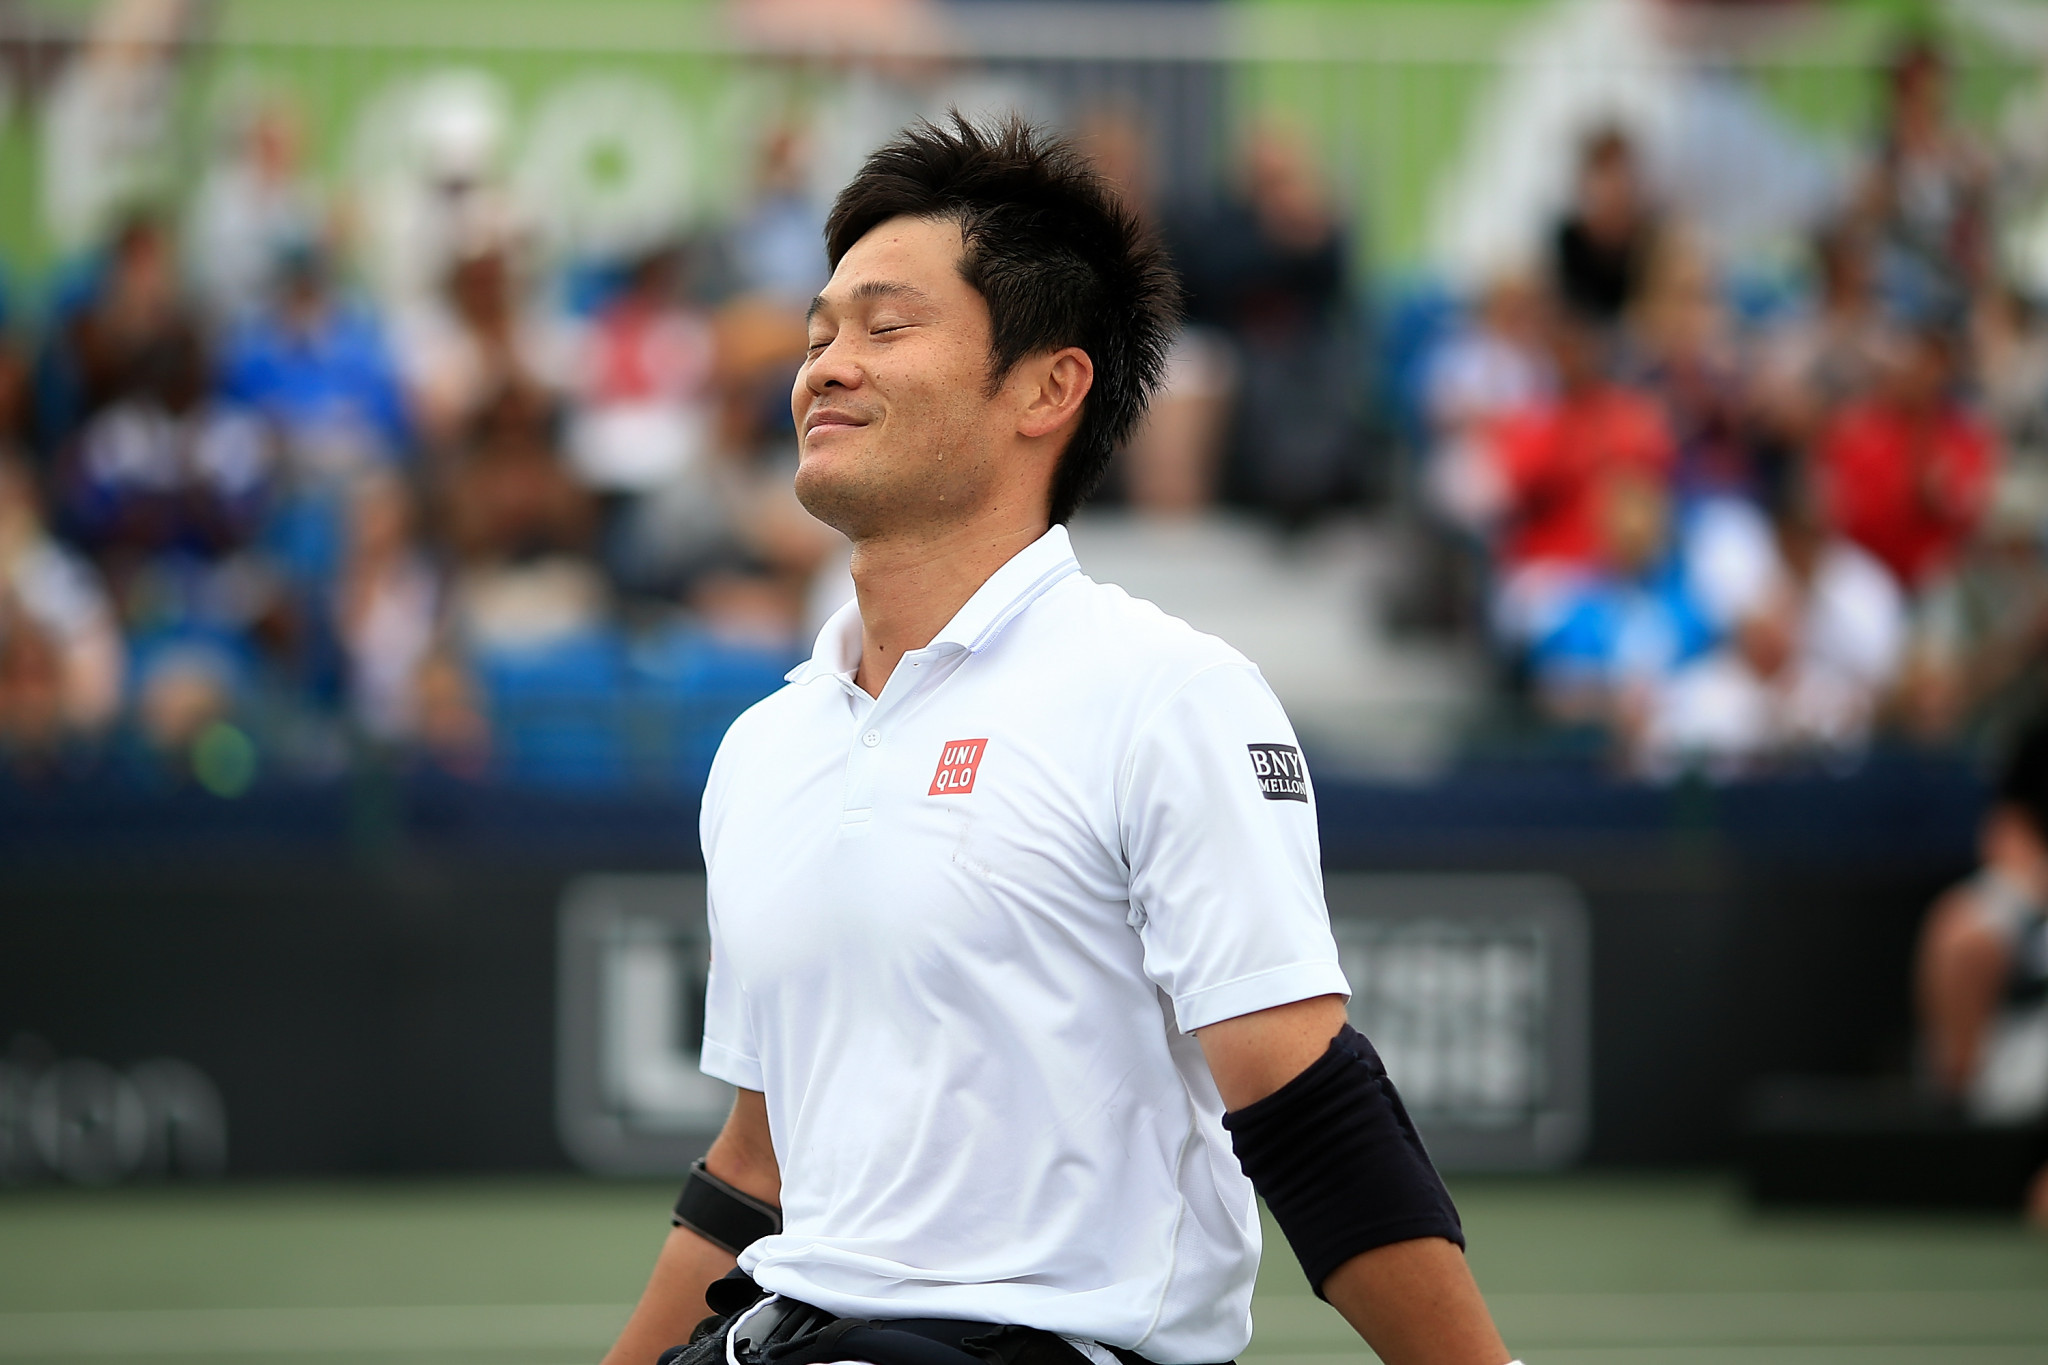 Shingo Kunieda has been named men's wheelchair tennis world champion for the eighth time ©Getty Images